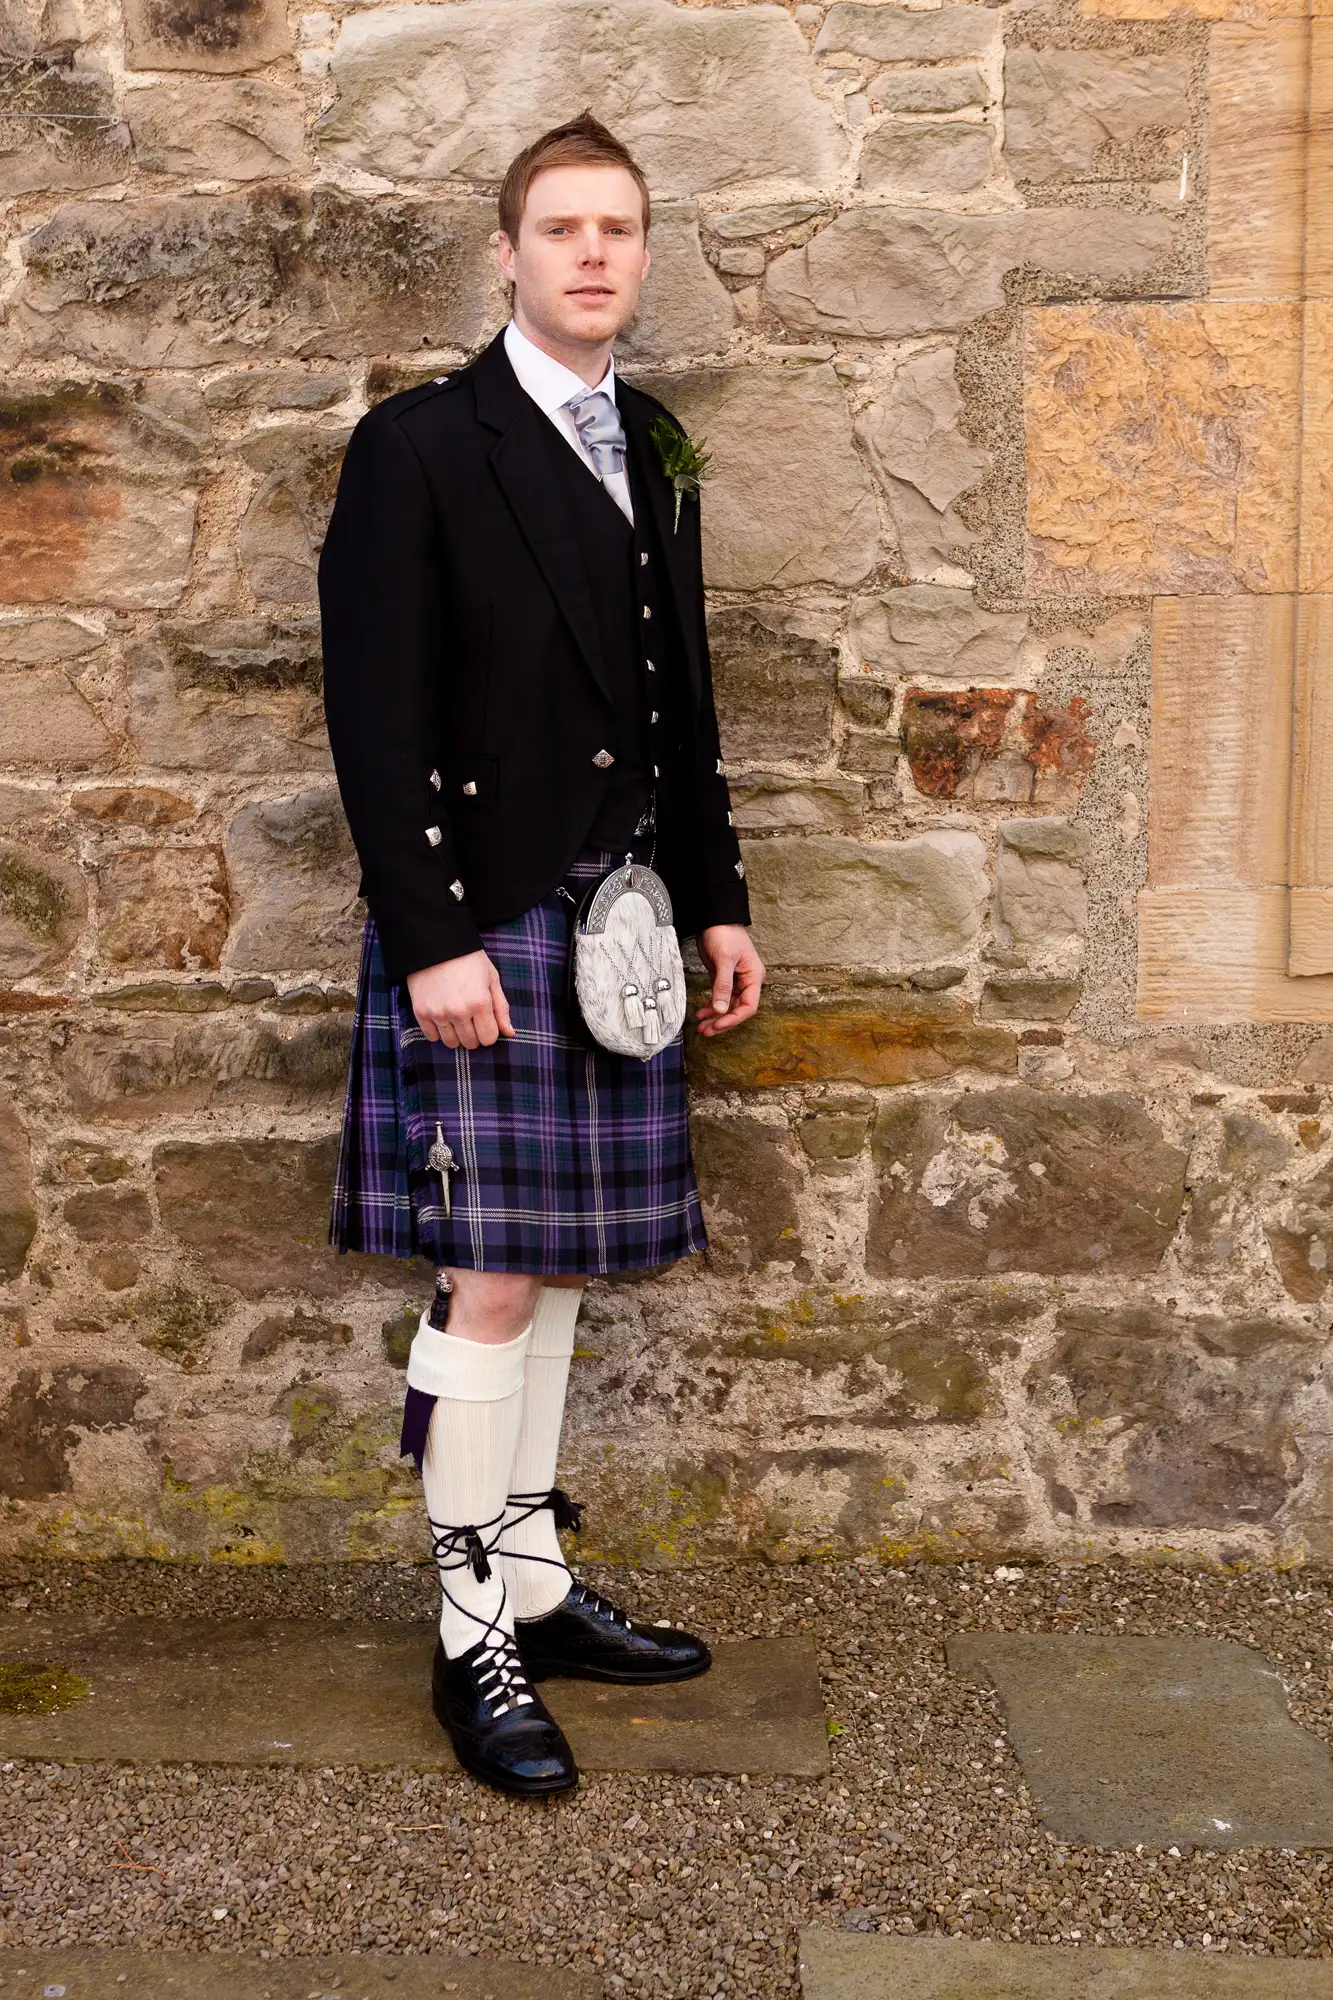 A man in traditional scottish attire, including a kilt, sporran, and black jacket, stands against a stone wall.